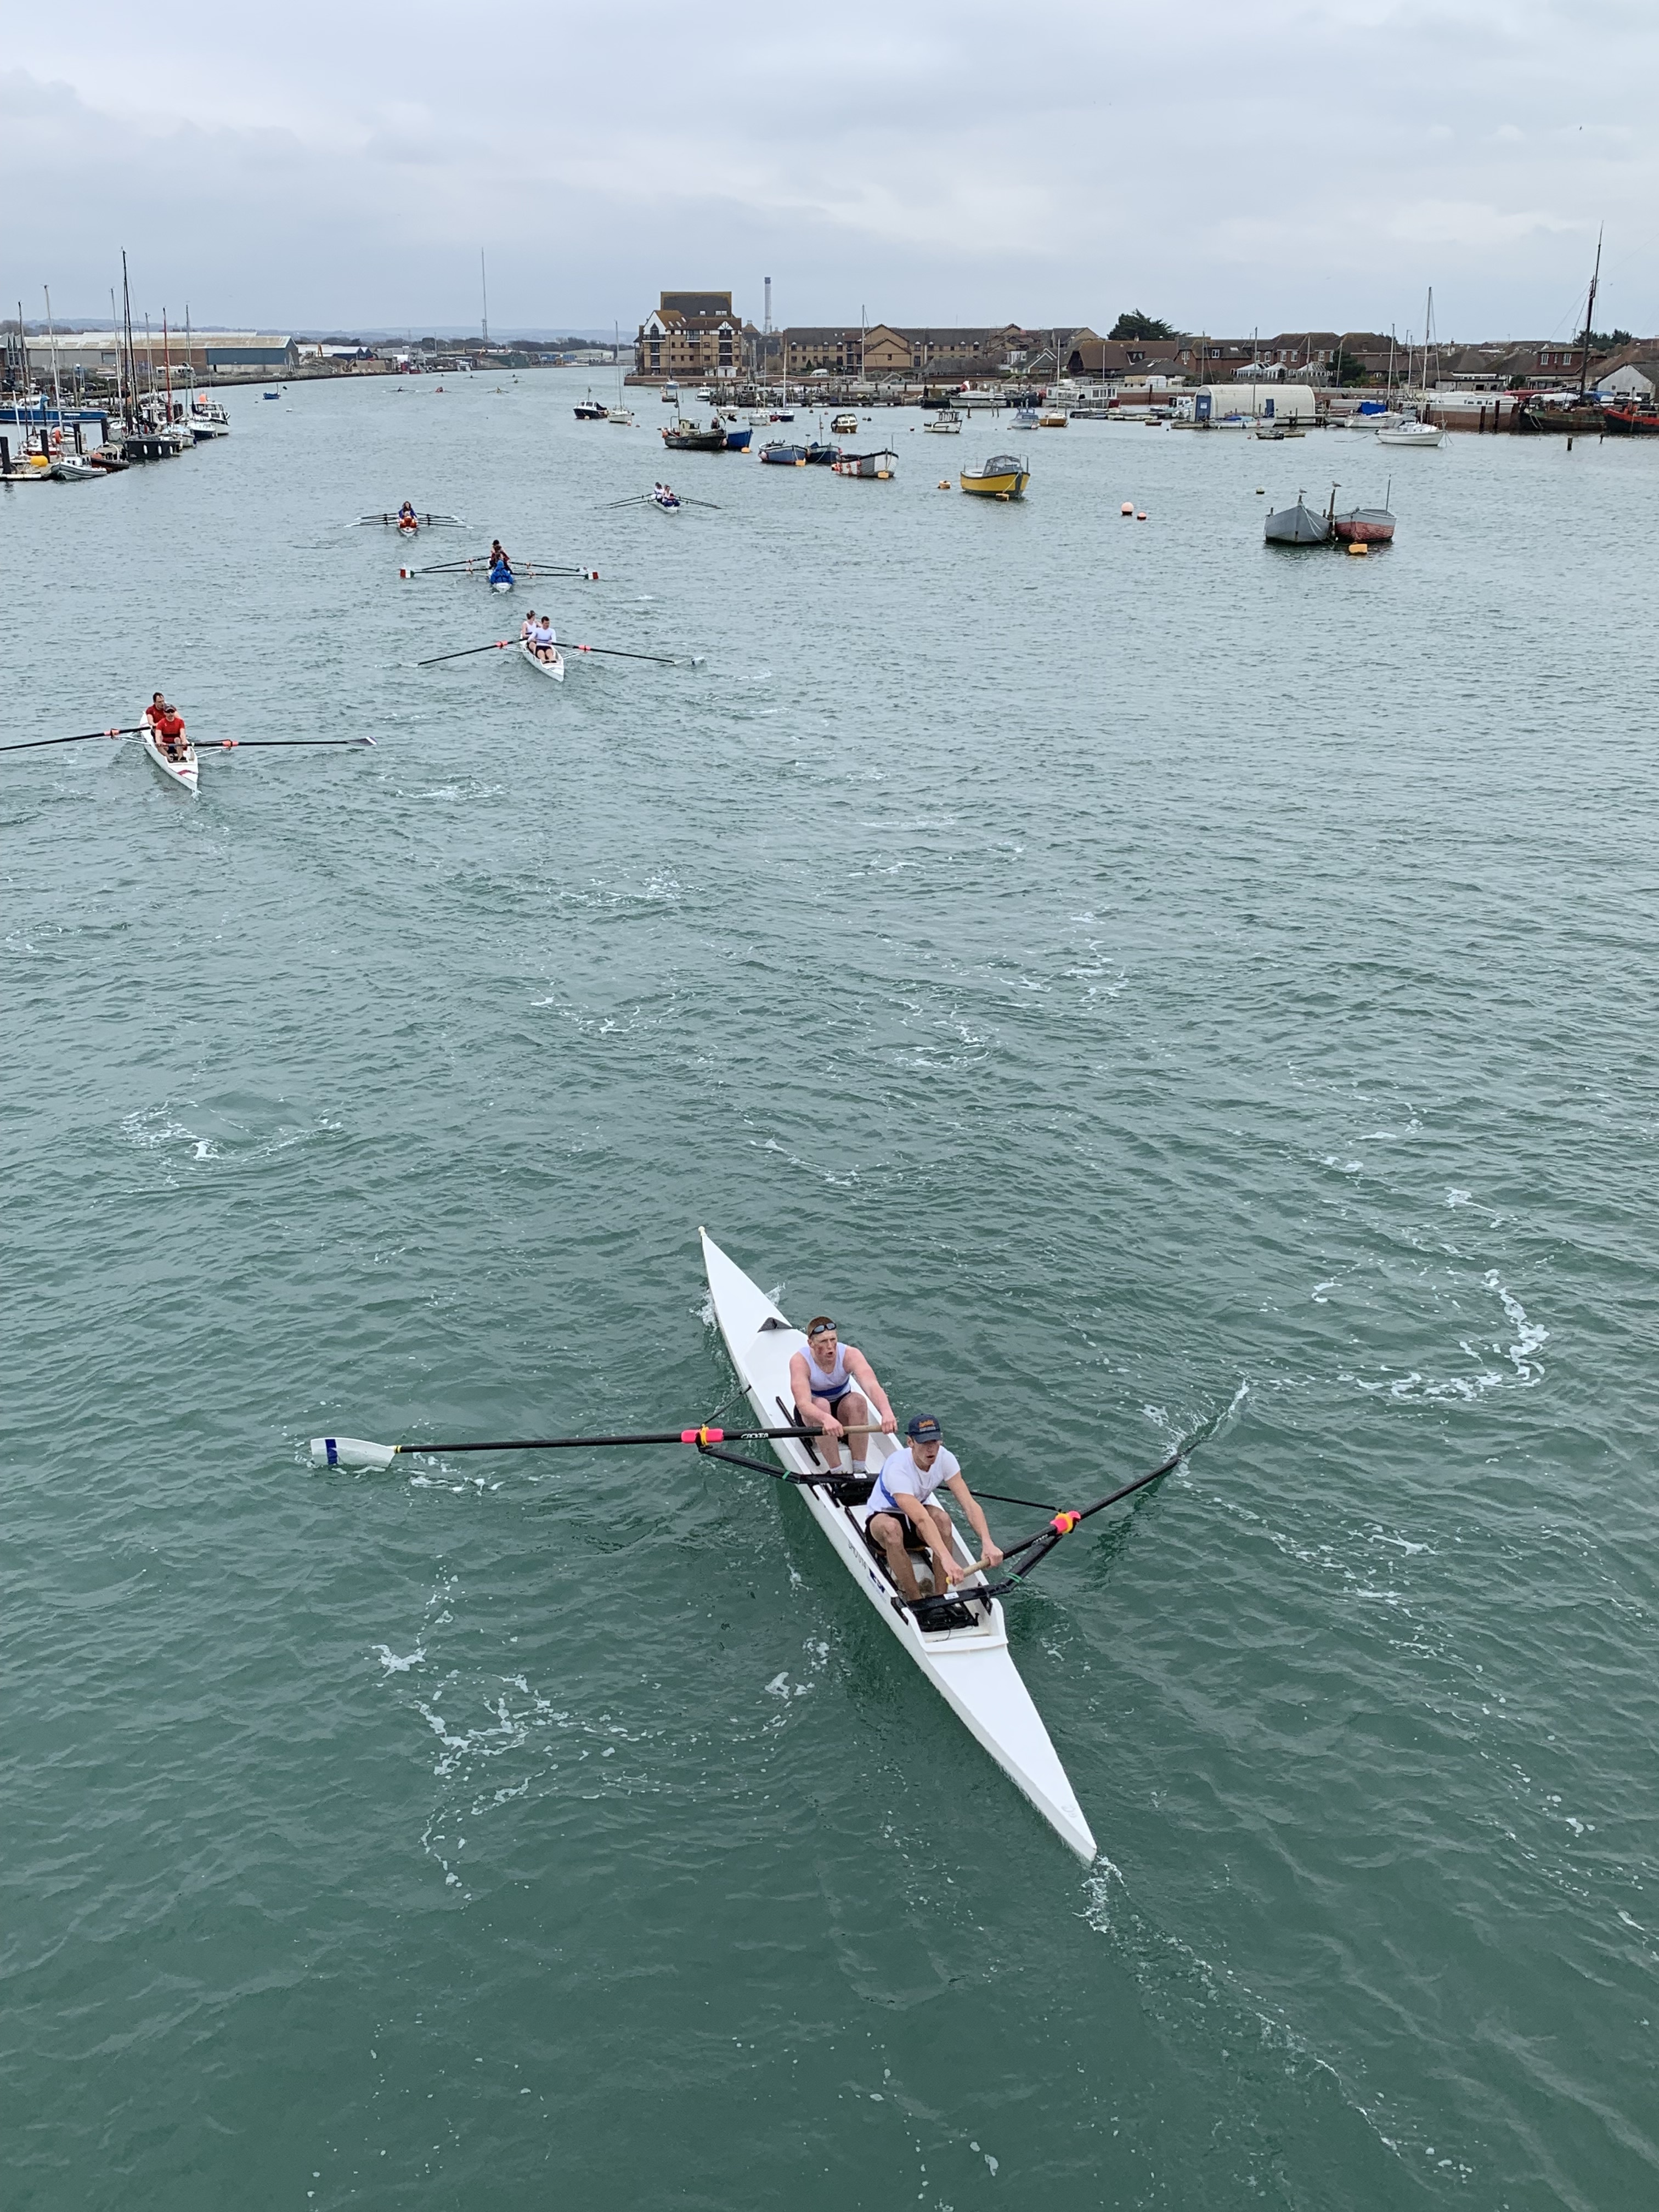 Shoreham success on home water at 2019 Head of the Adur